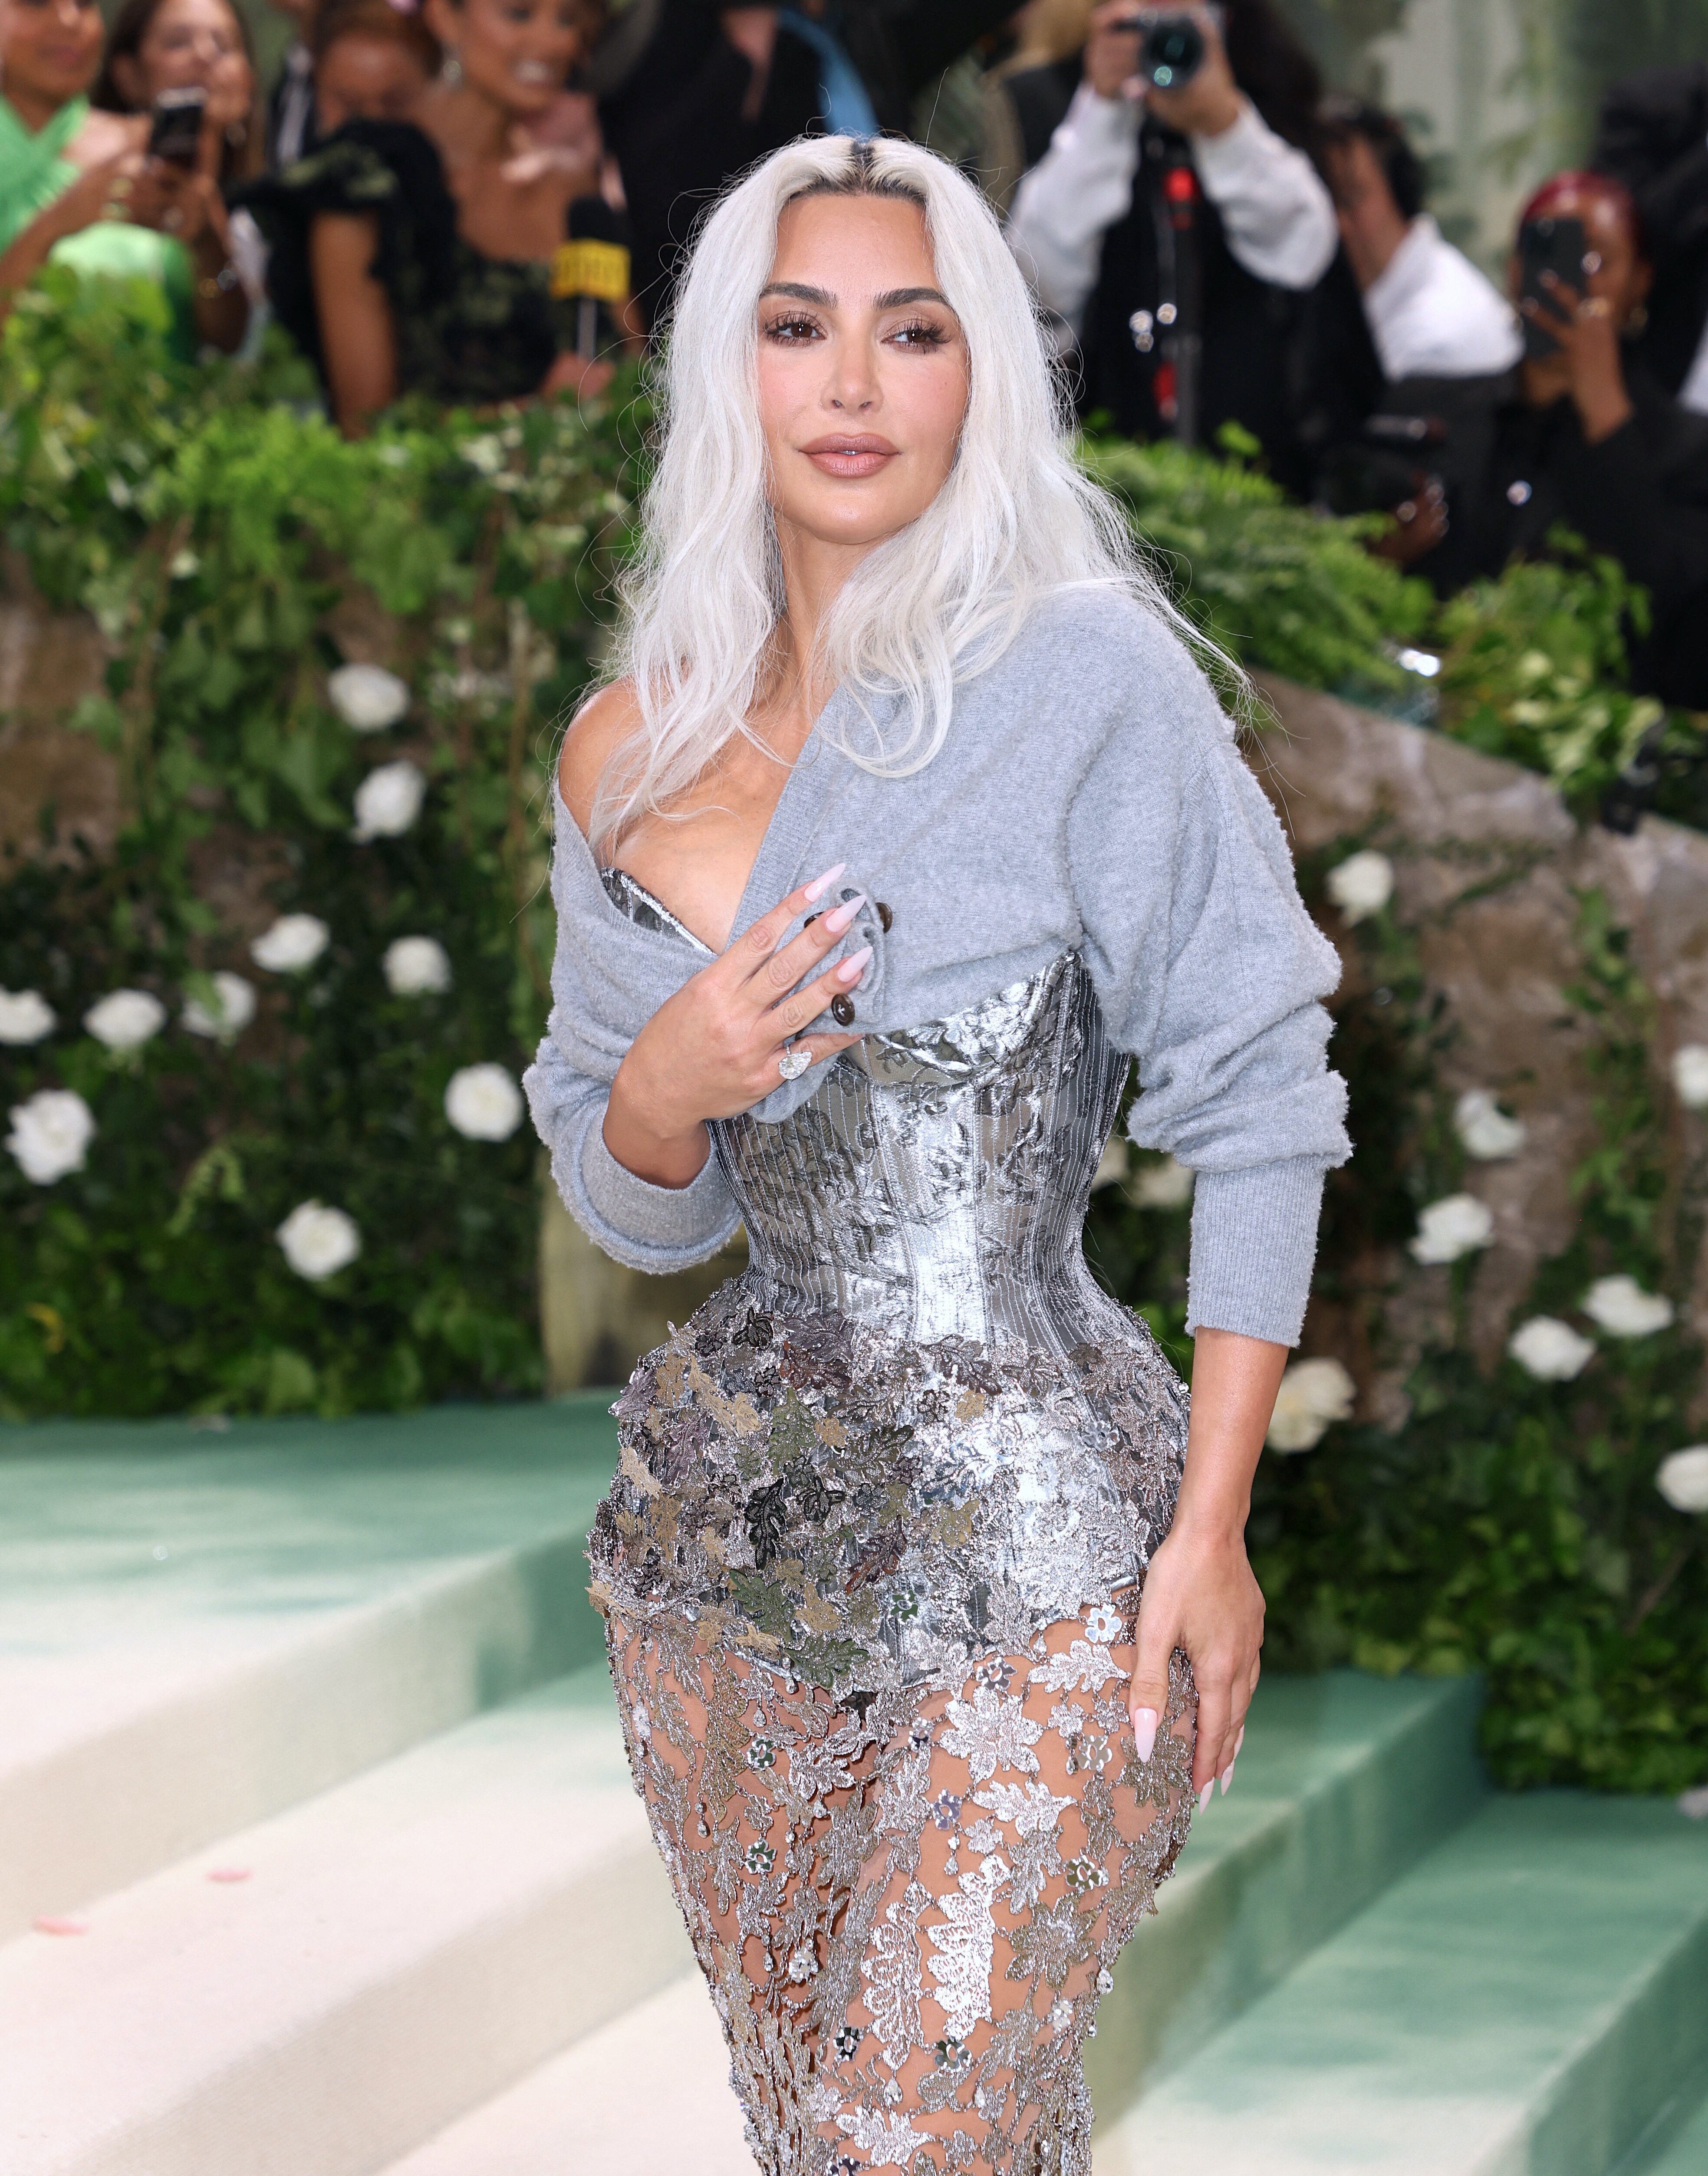 Kim's appearance on the roast came shortly before she attended this year's Met Gala on Monday in a custom Margiela by John Galliano ensemble